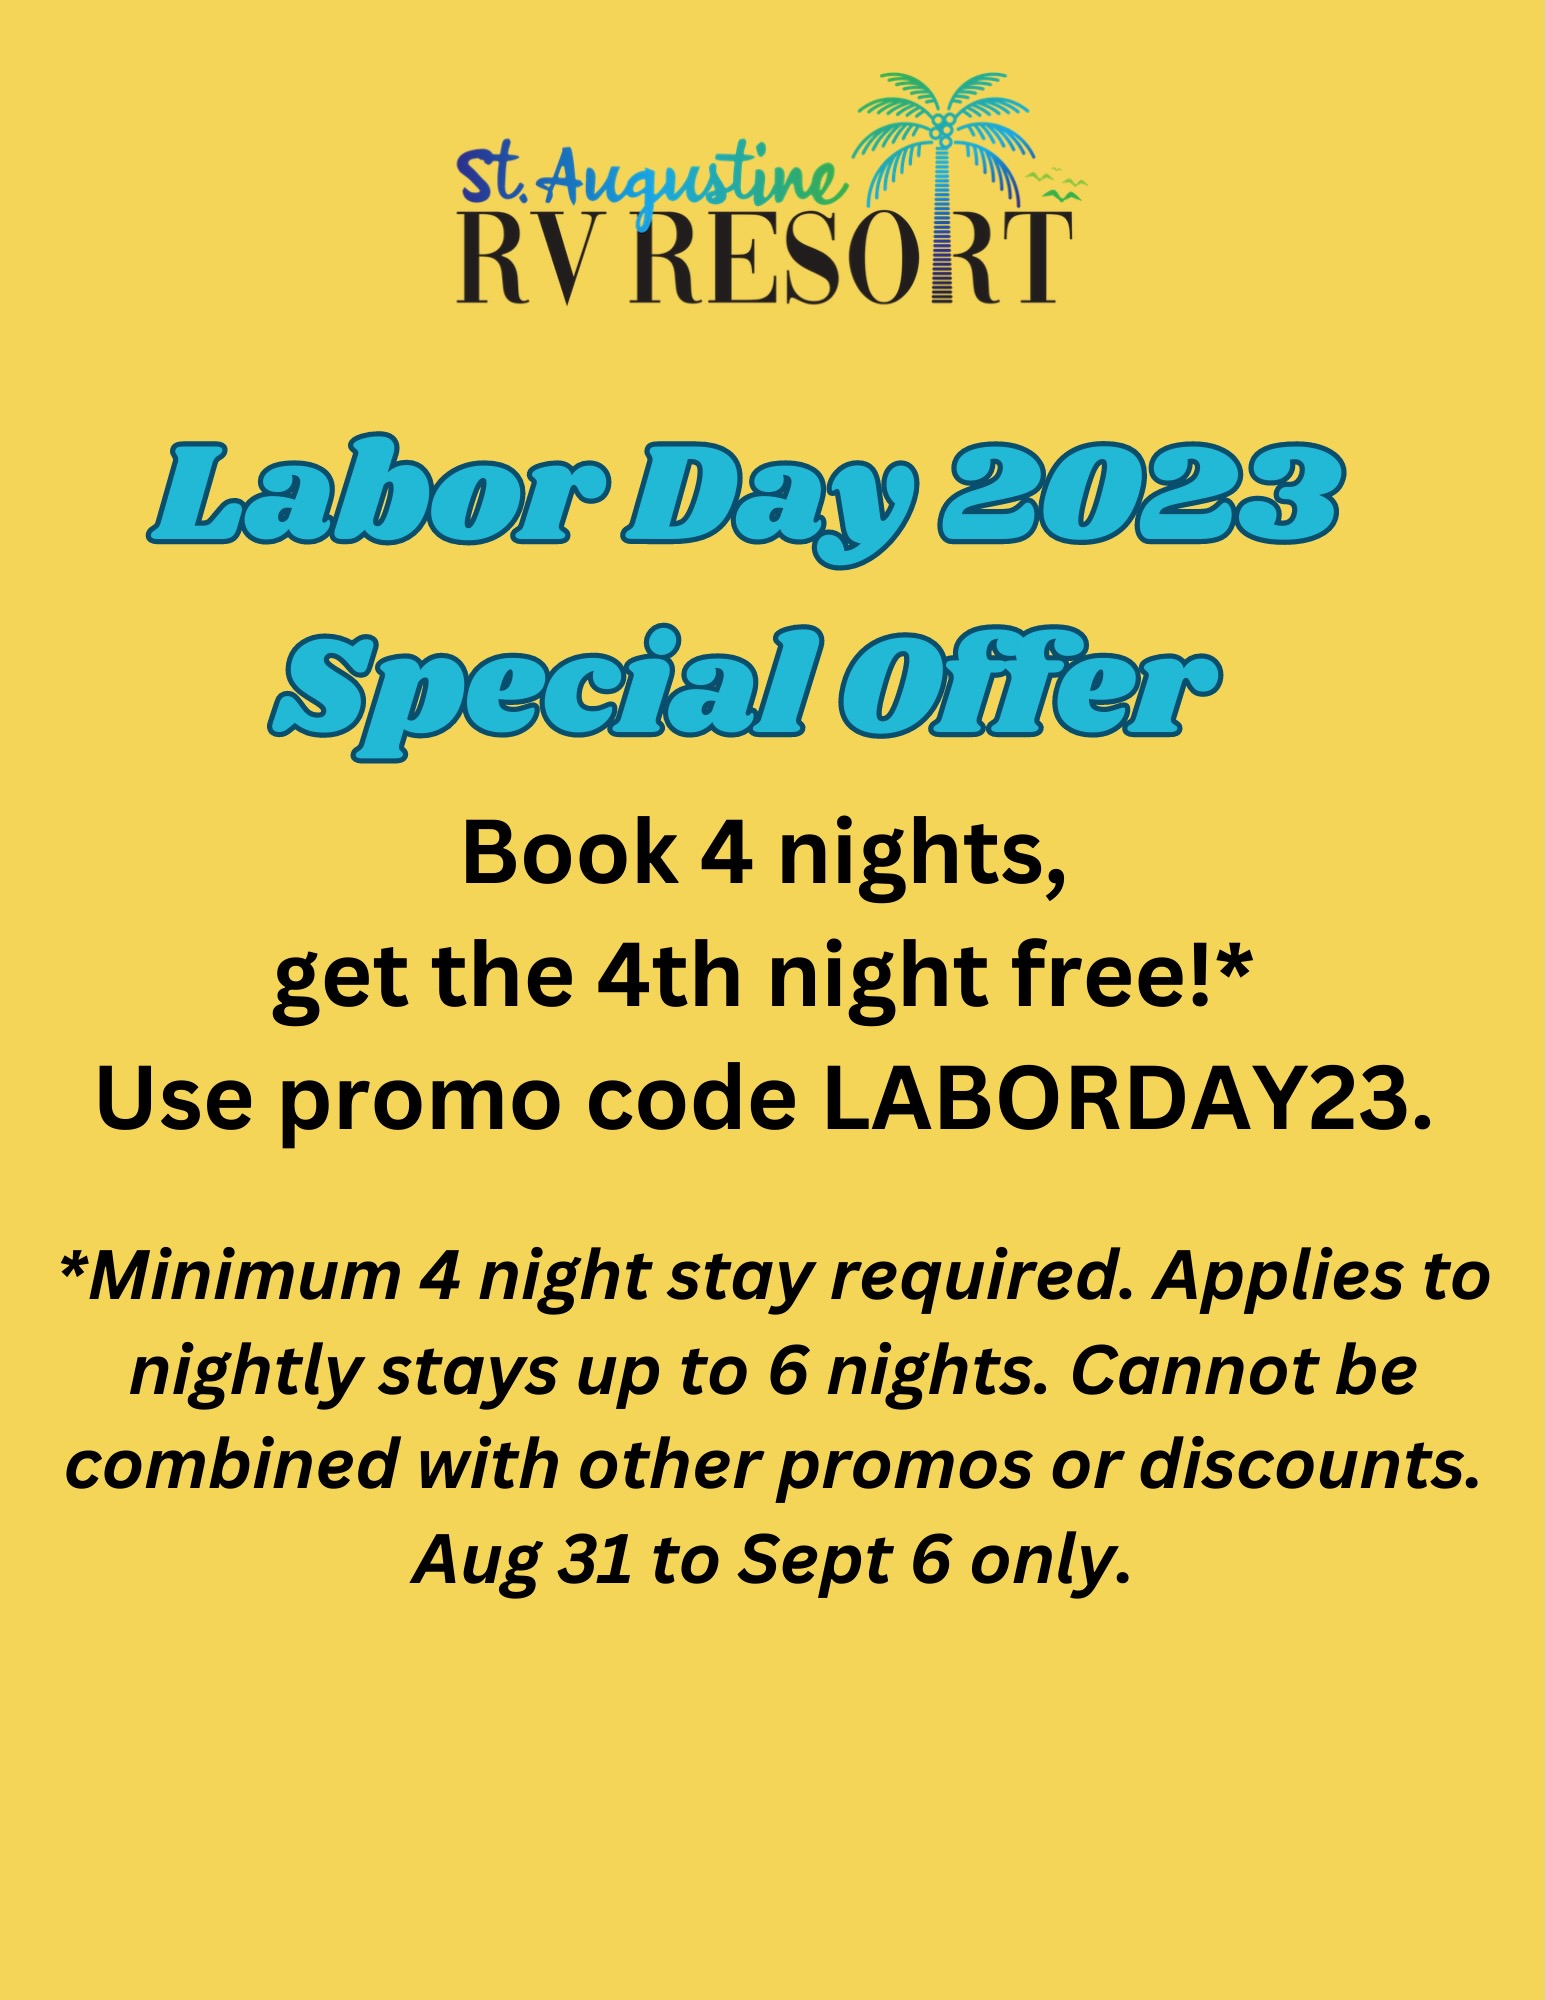 Labor Day 2023 Special Offer!